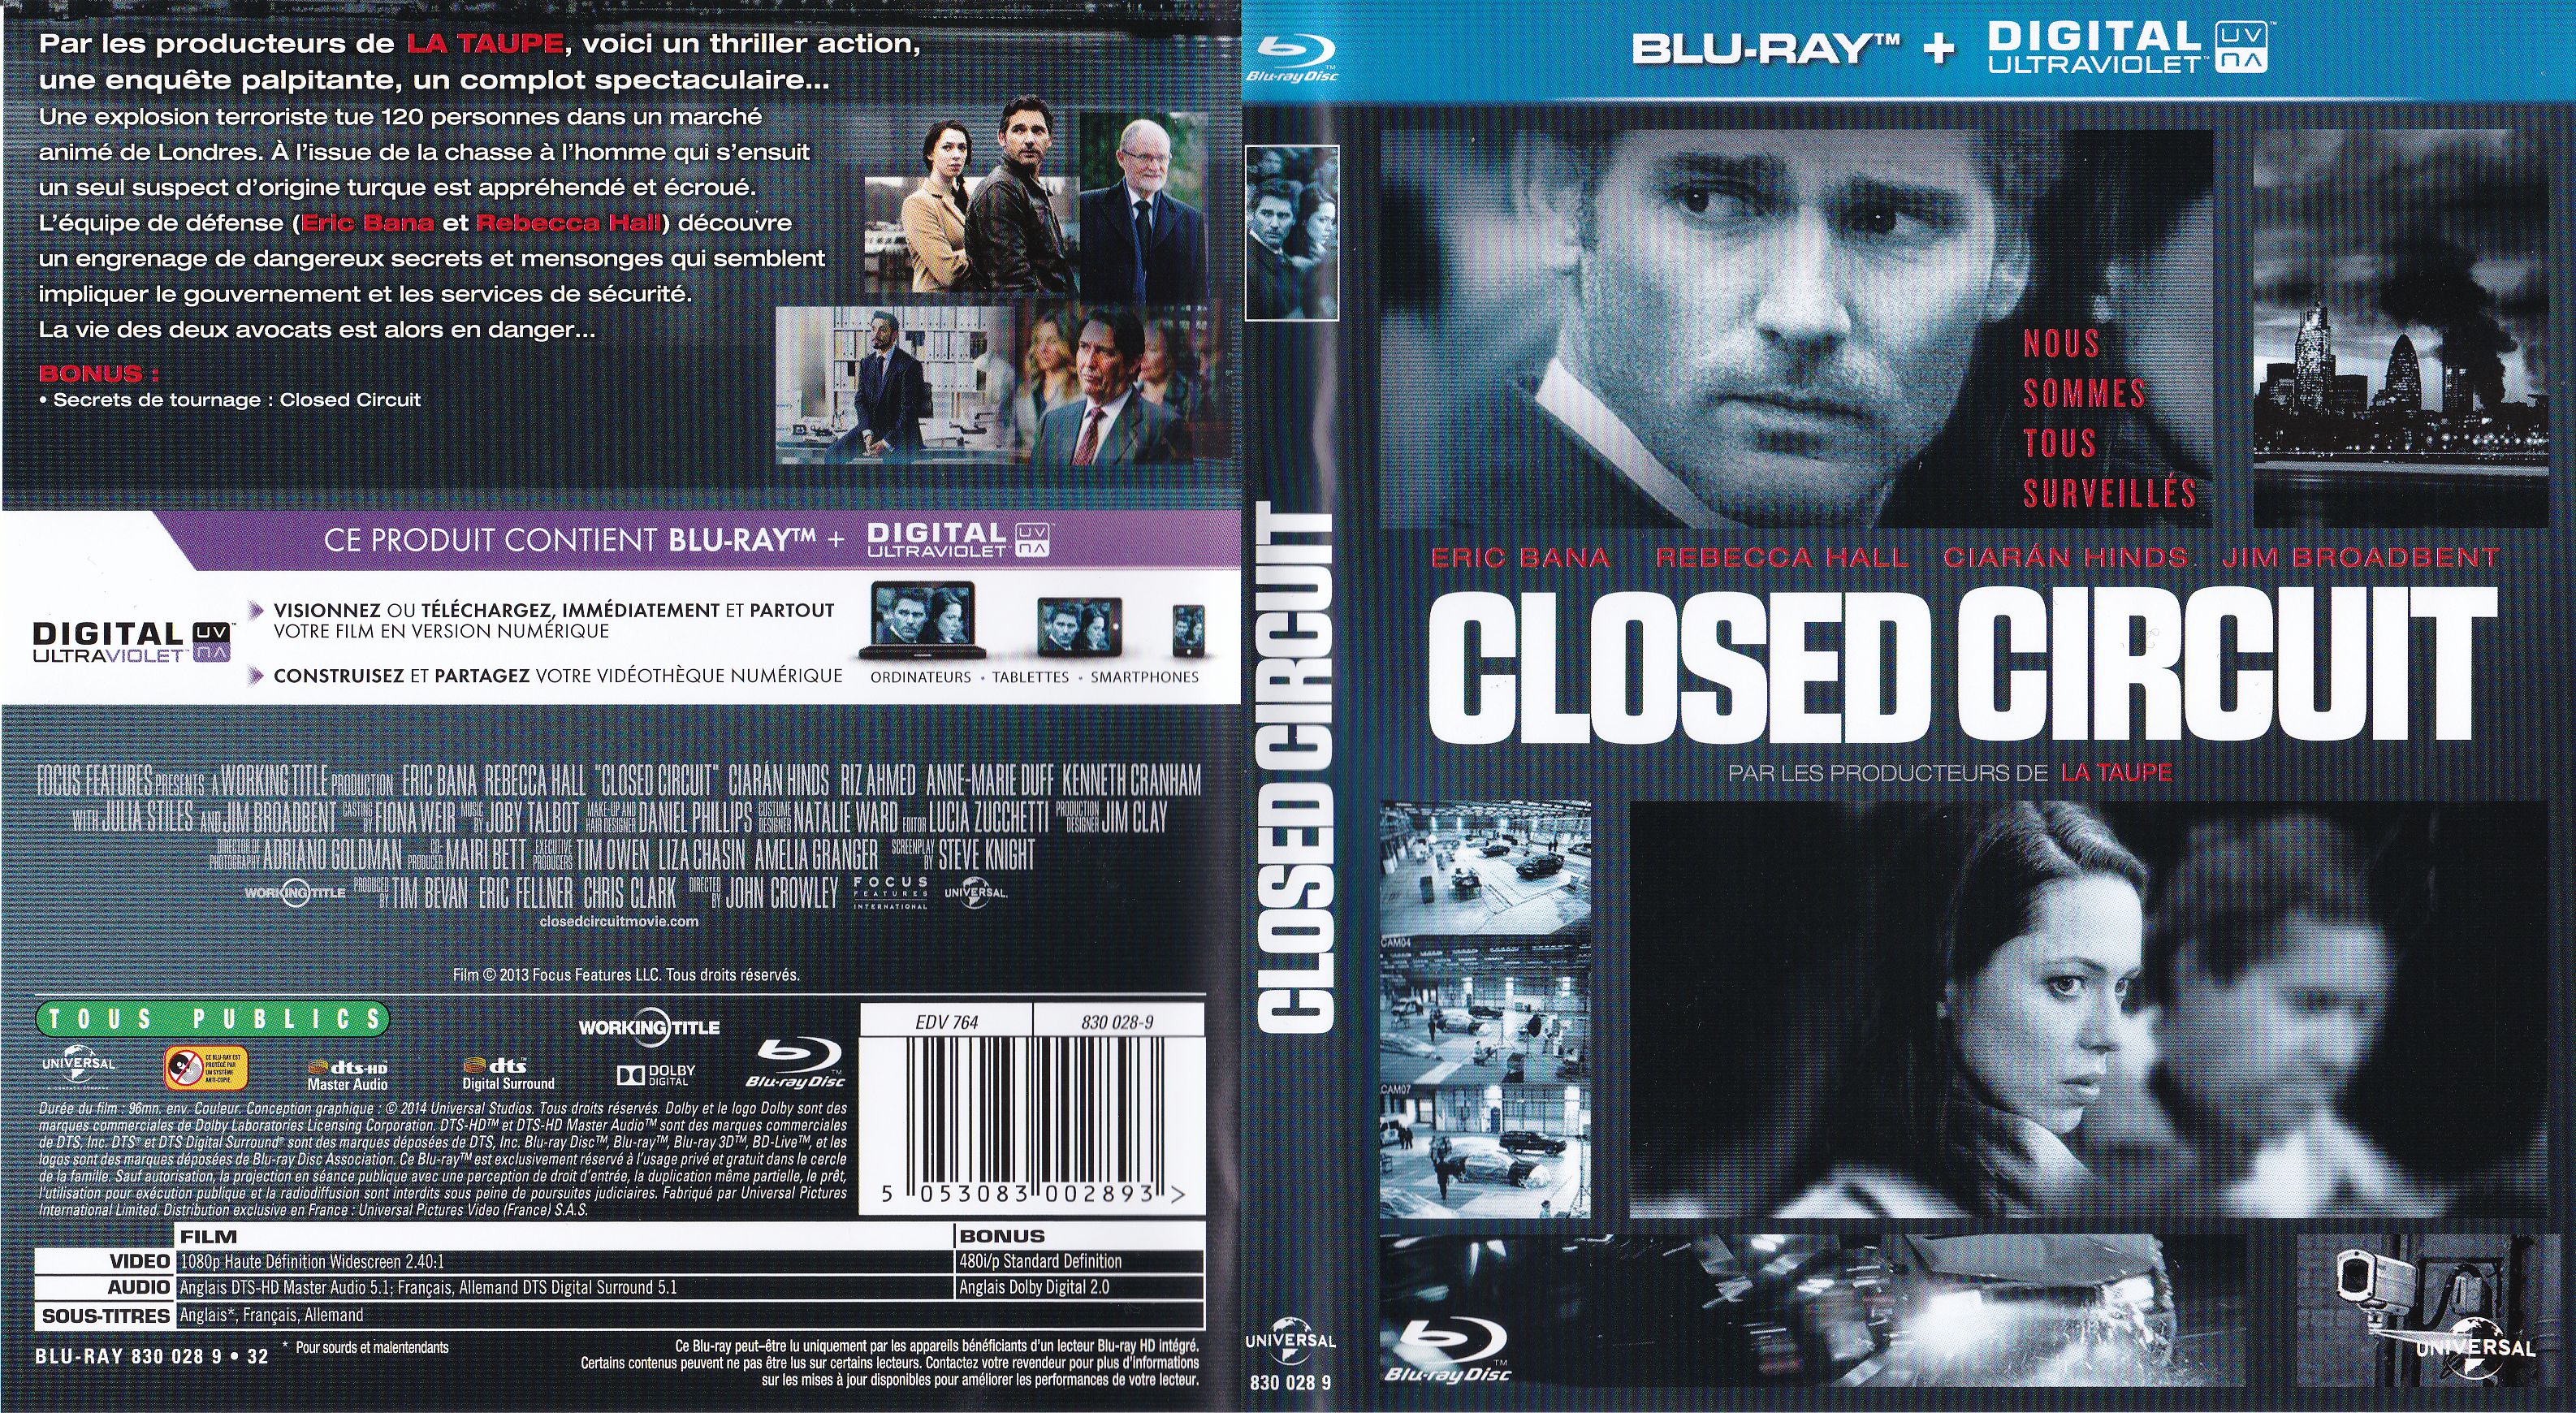 Jaquette DVD Closed circuit (BLU-RAY)